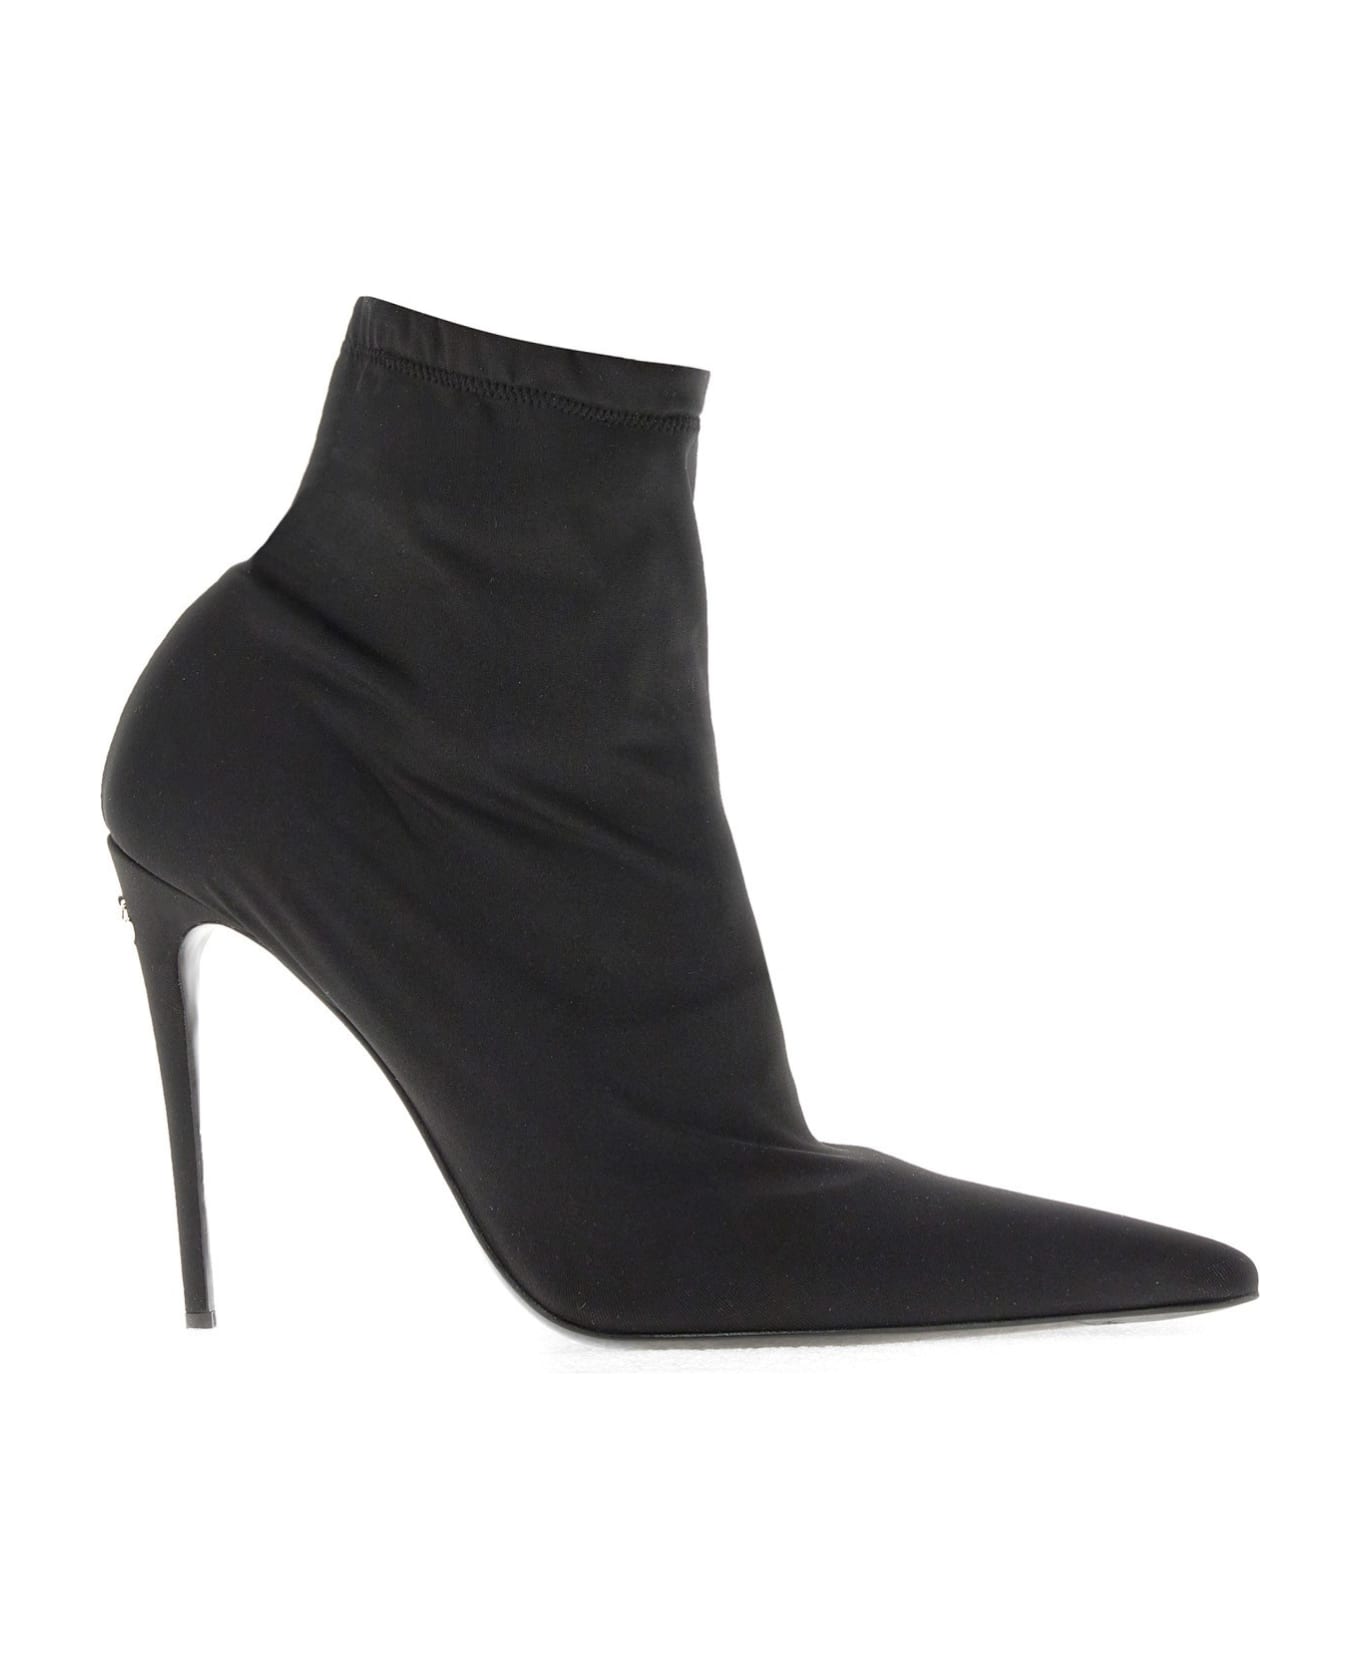 Dolce & Gabbana Stretch Jersey Ankle Boots - Black ブーツ